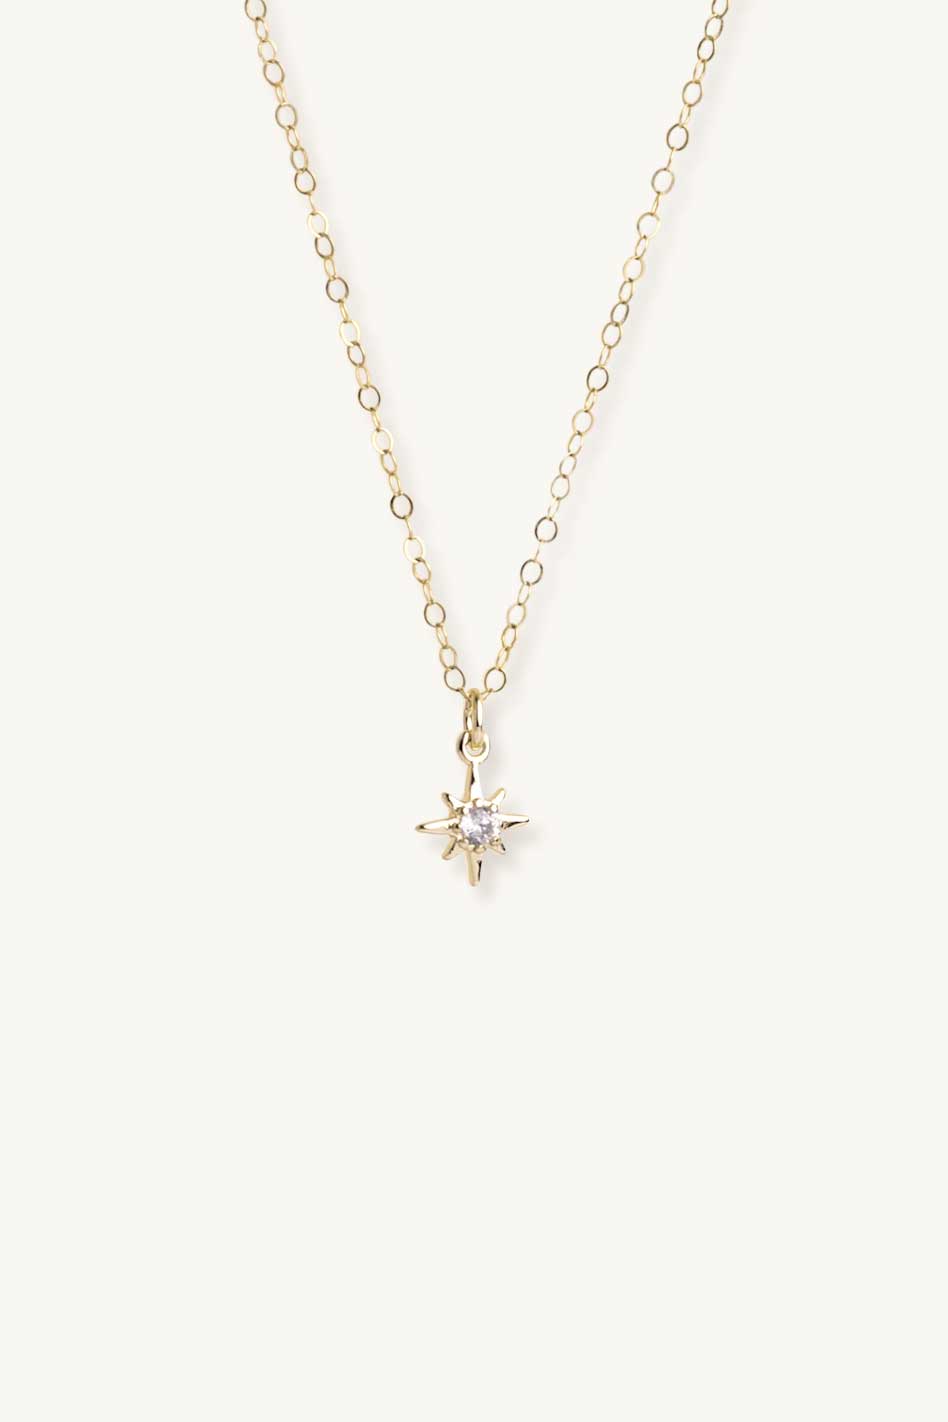 North Star Diamond Necklace - White Gold – EDGE of EMBER